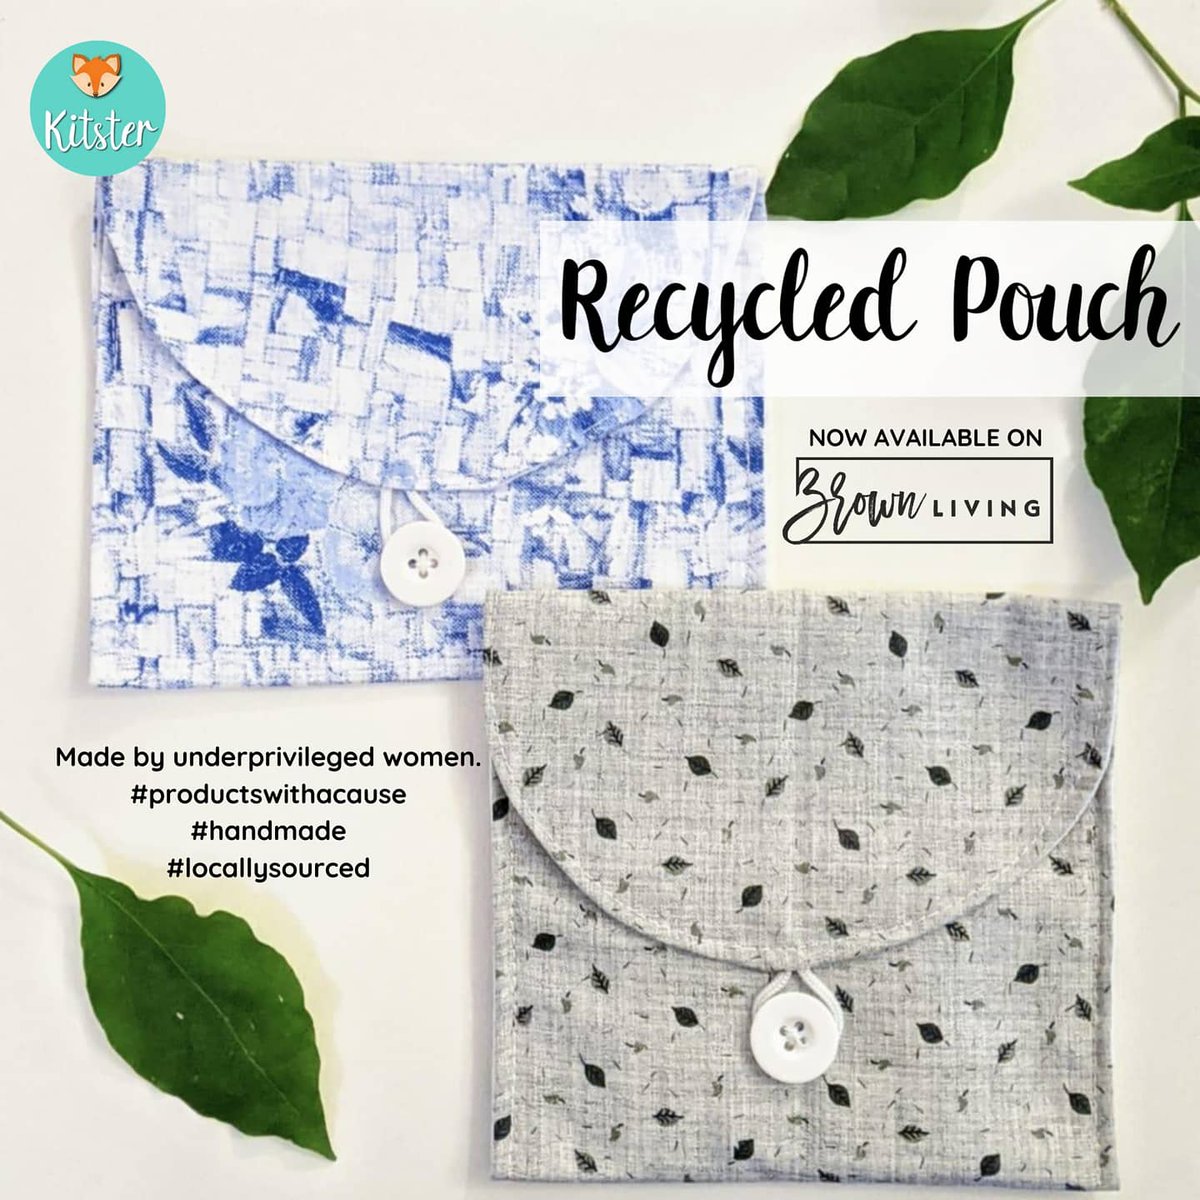 Our mask sets with recycled cloth pouch are now available on @brownliving_ 

#shoponlysustainable #sustainability #ecofriendly #recycled #mask #clothmask